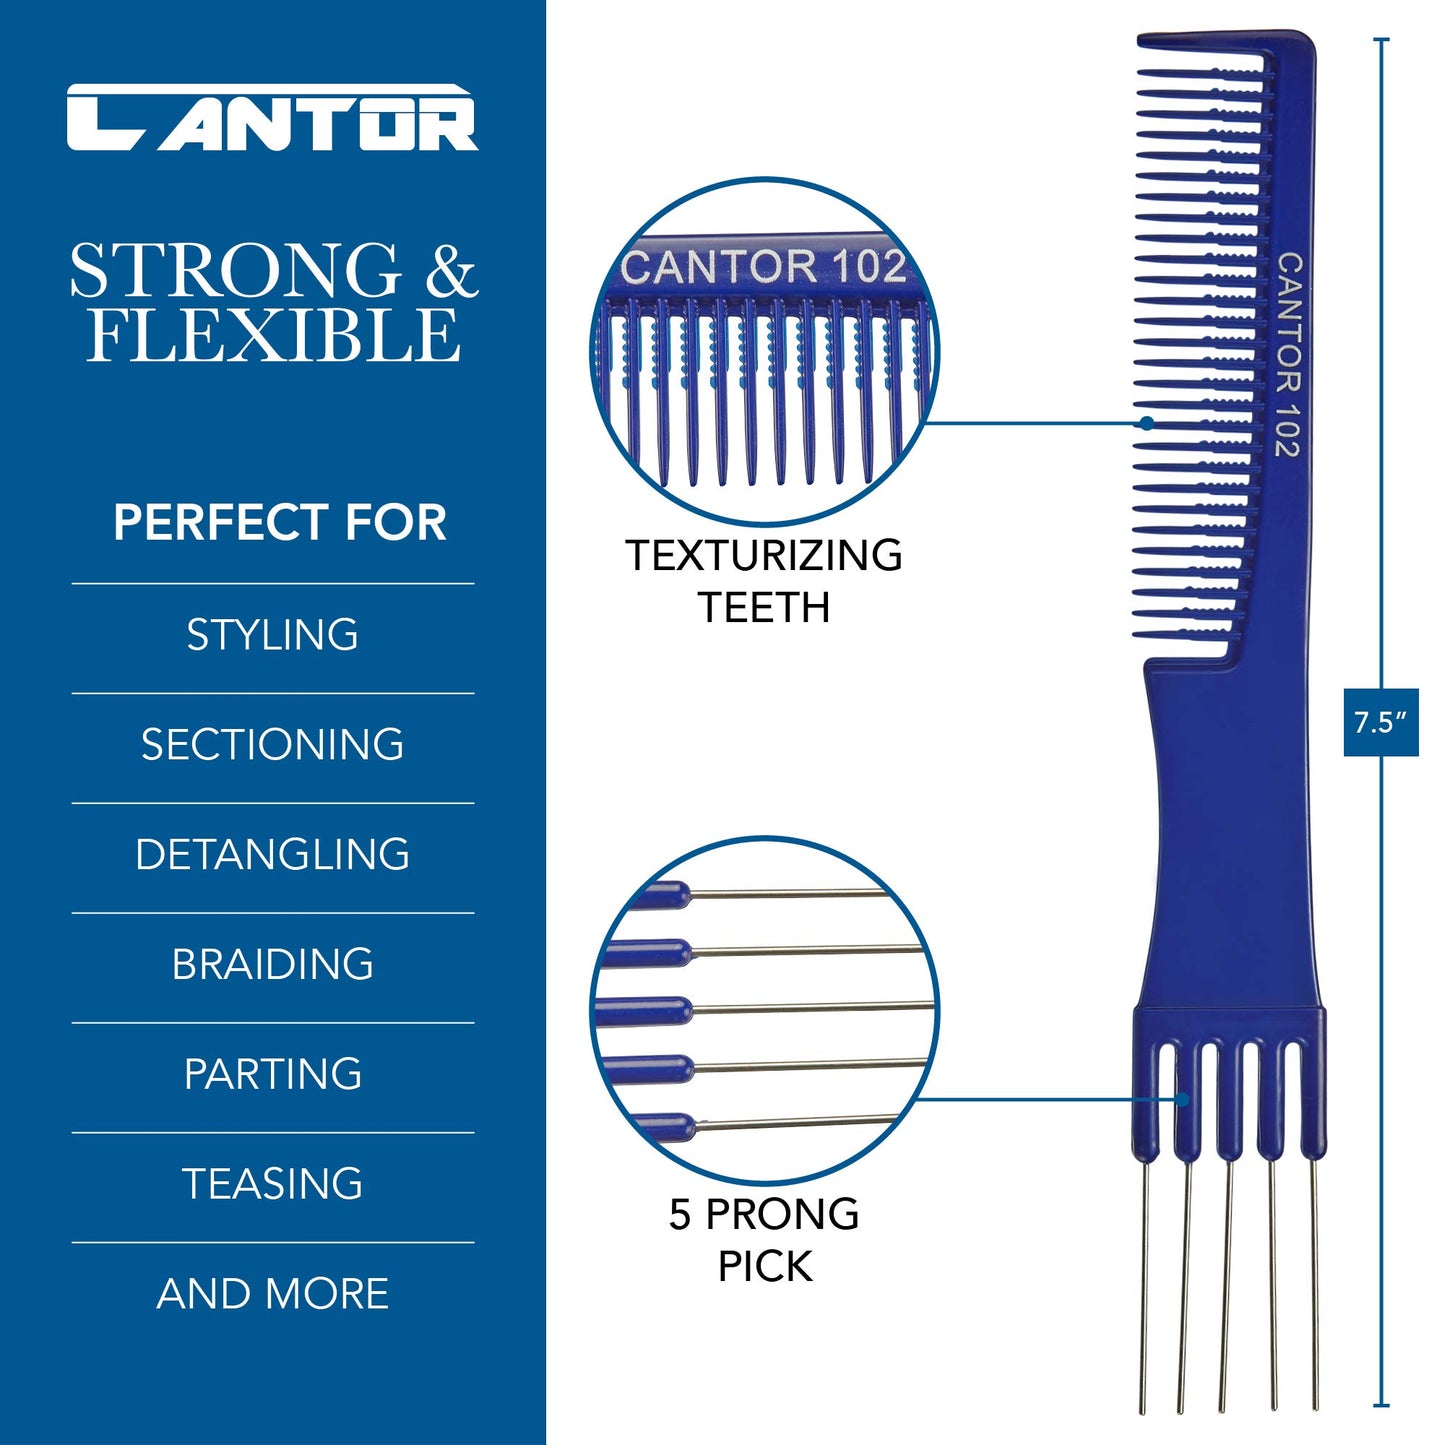 Lift Teasing Comb and Hair Pick – 2 Pack, Five Stainless Still Lifts - Chemical and Heat Resistant Detangler Styling Comb – Anti Static Comb For All Hair Types – By Cantor